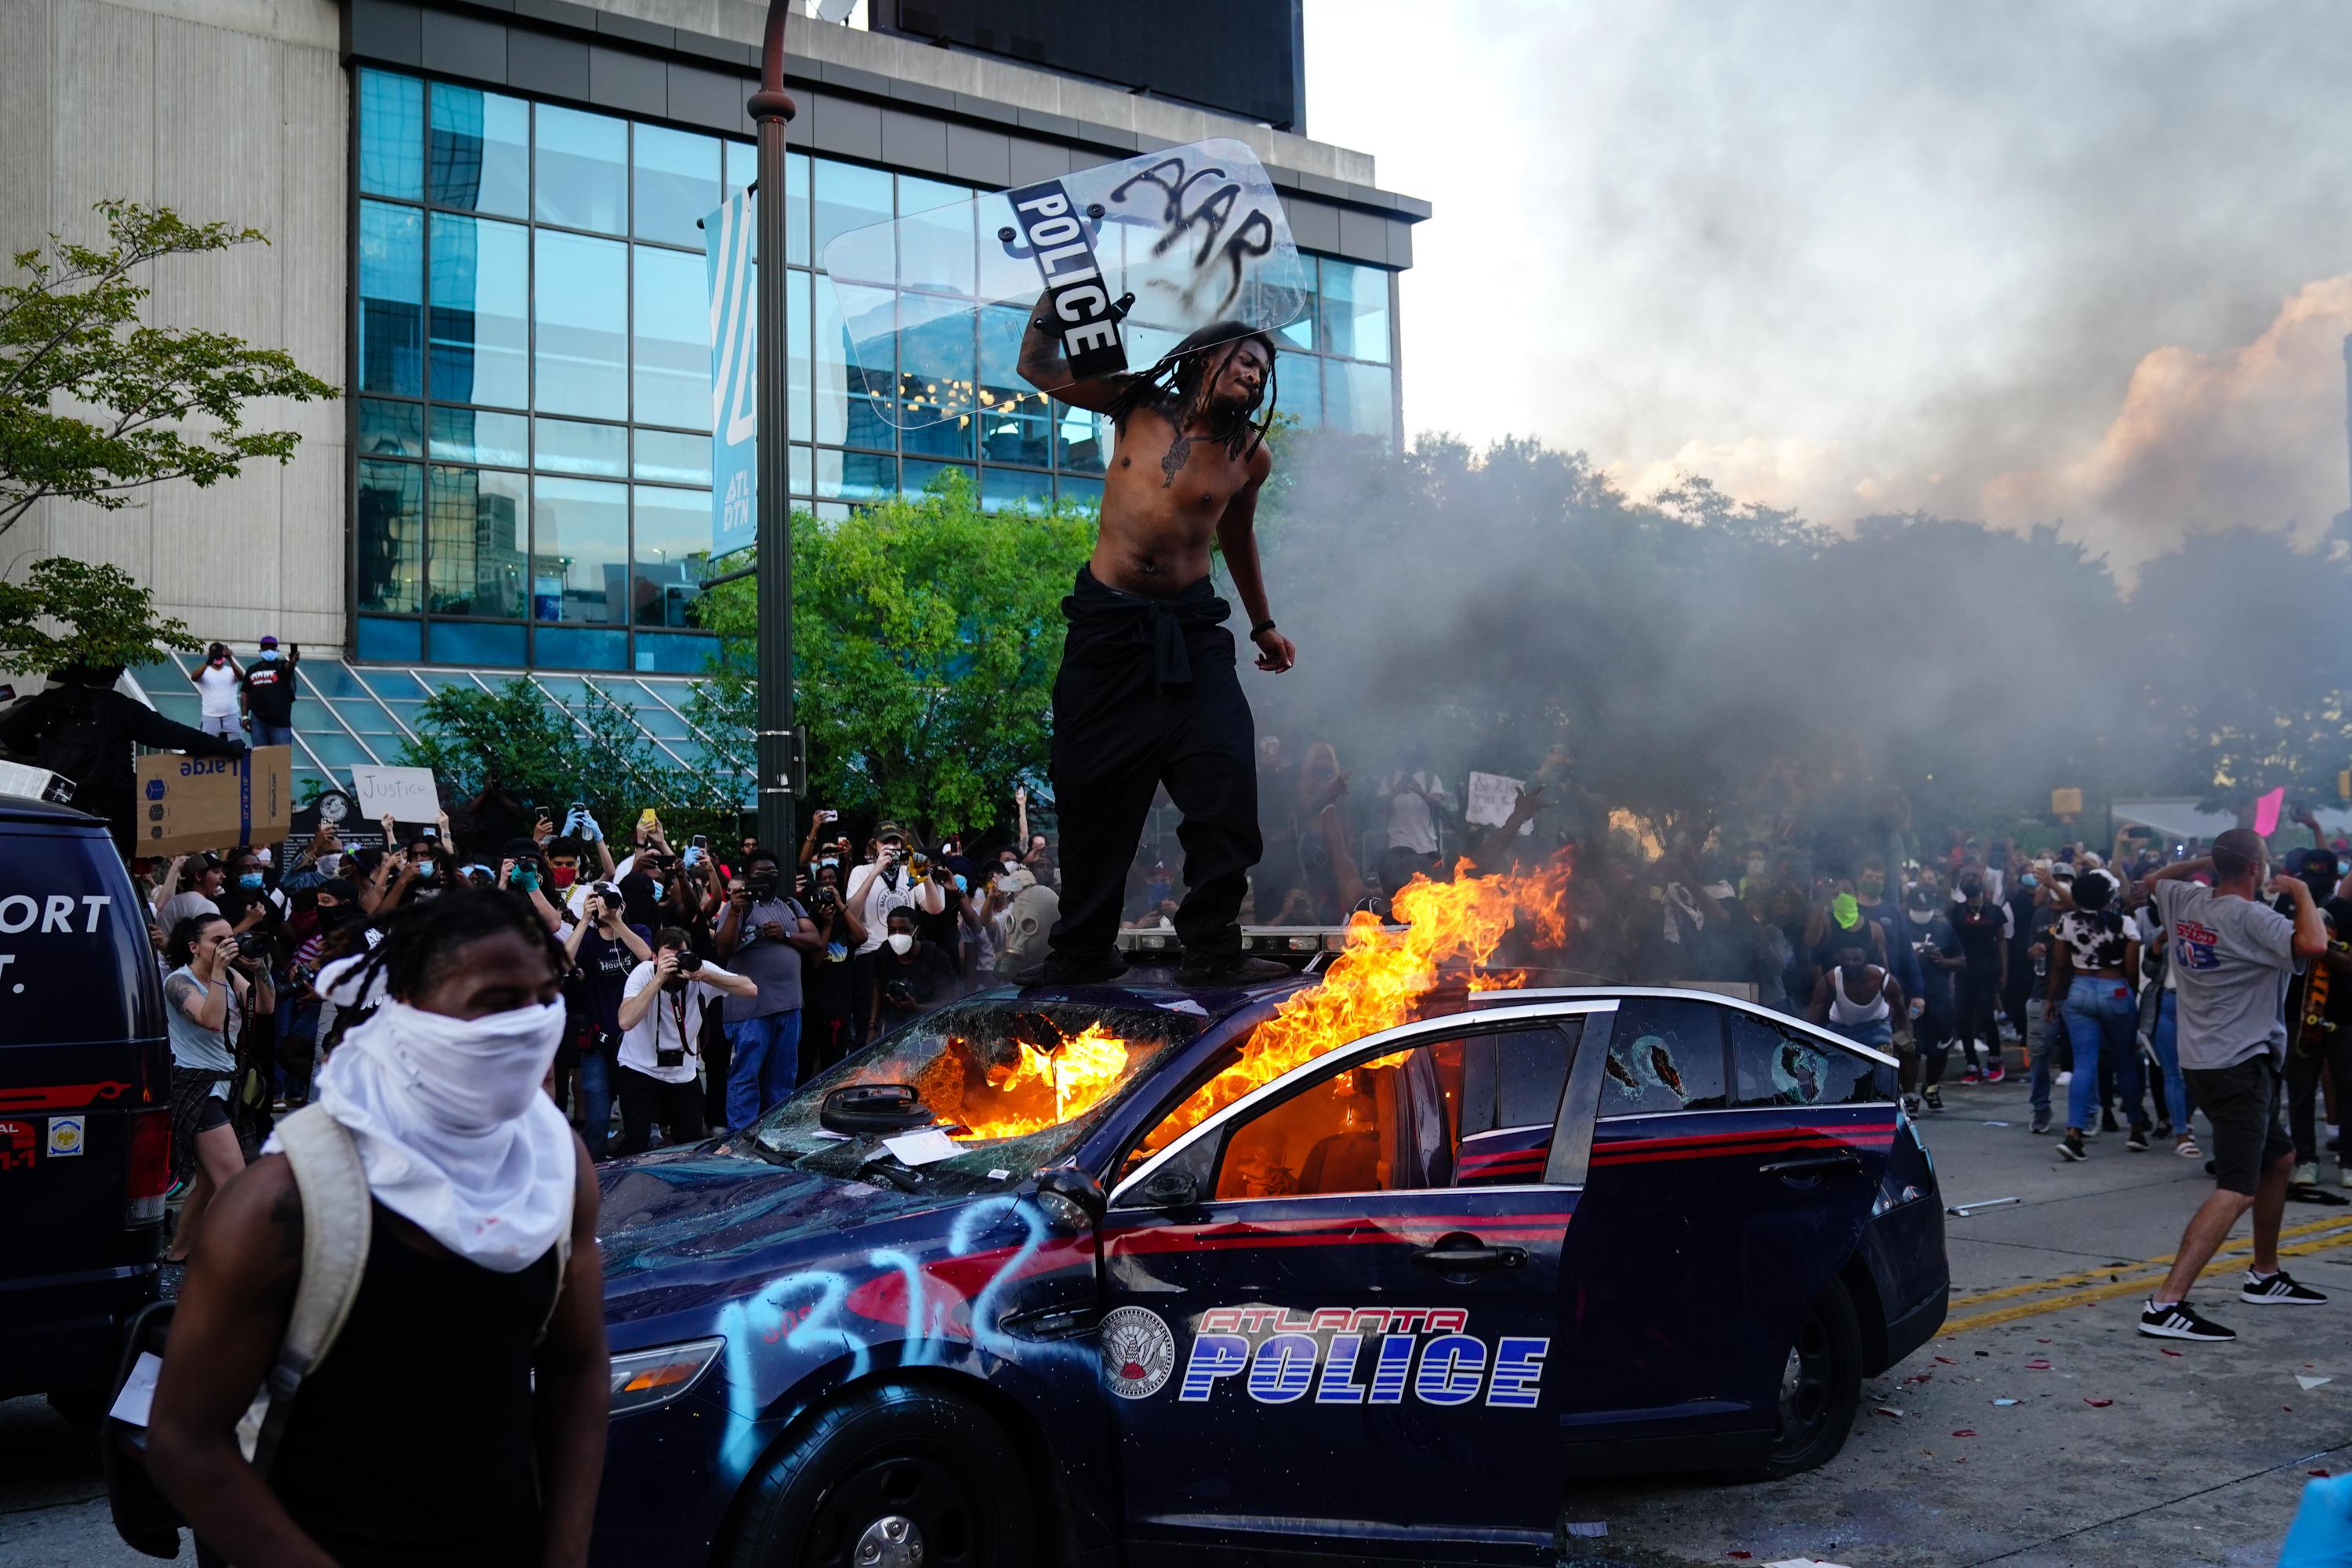 A man stands on top of a burning police car during a protest on May 29, 2020 in Atlanta, Georgia. 